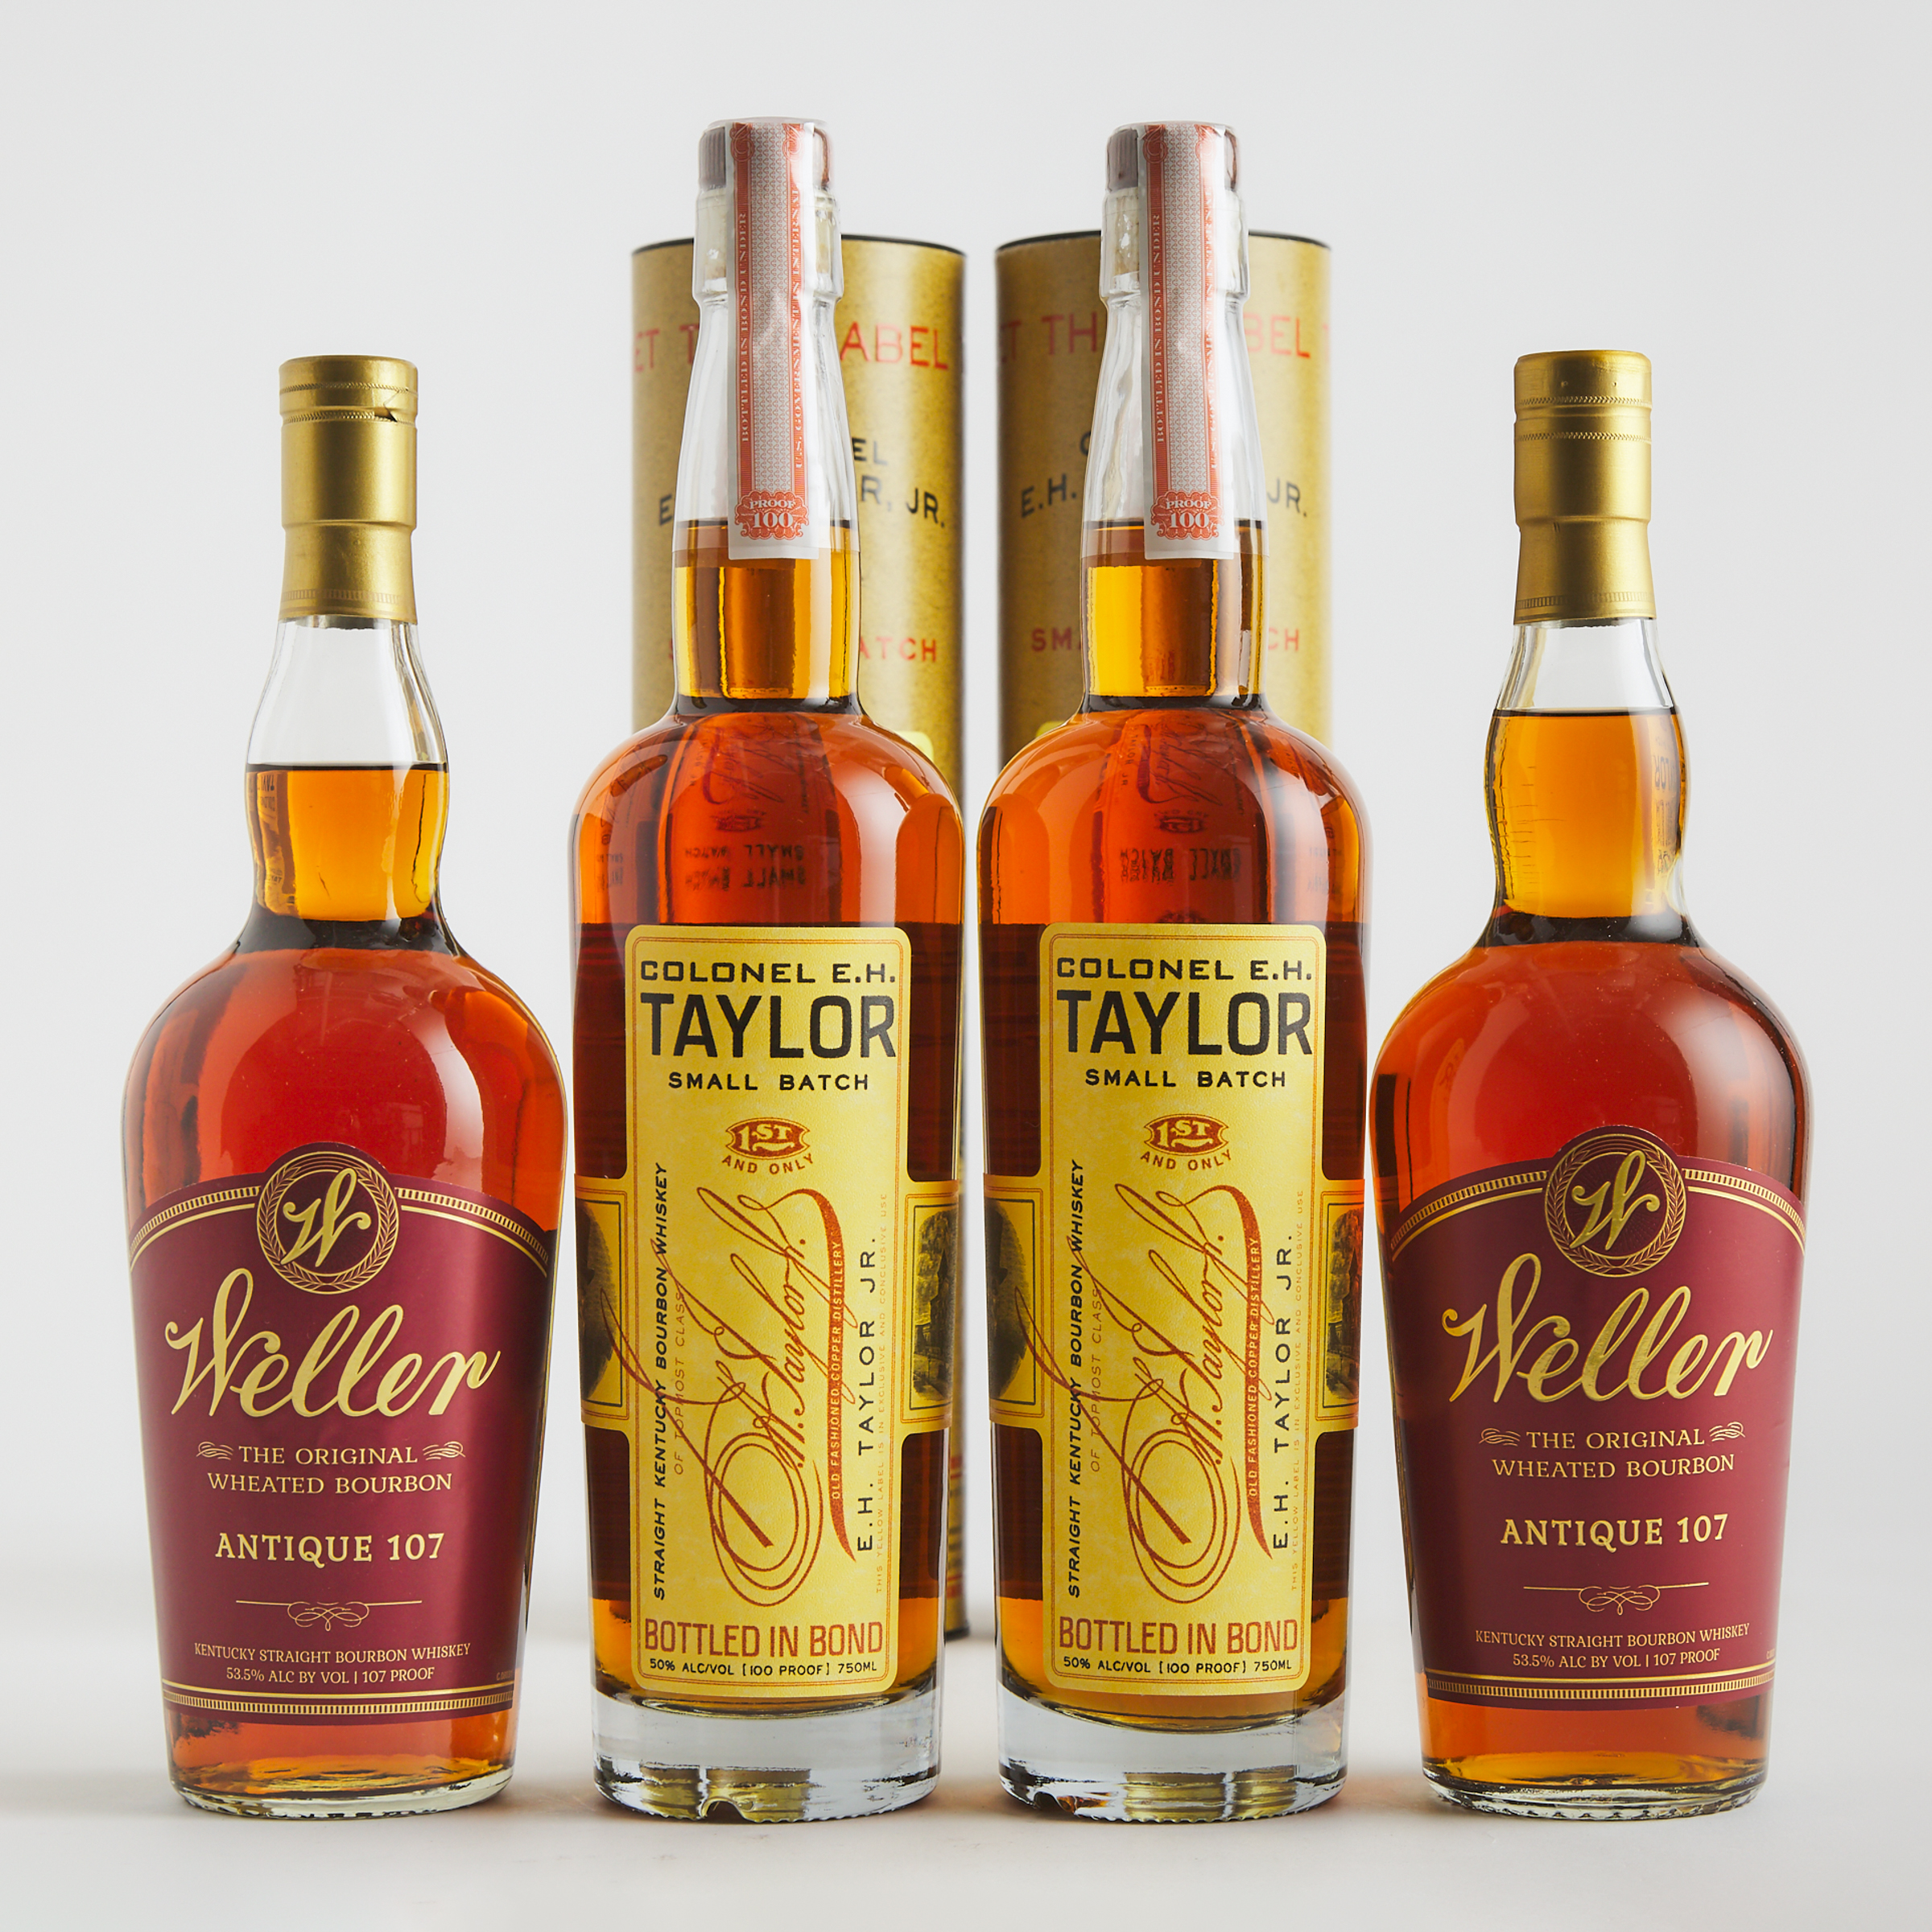 COLONEL E.H. TAYLOR JR. SMALL BATCH STRAIGHT KENTUCKY BOURBON WHISKEY (TWO 750 ML)
WELLER ANTIQUE 107 ORIGINAL WHEATED BOURBON WHISKEY (TWO 750 ML)